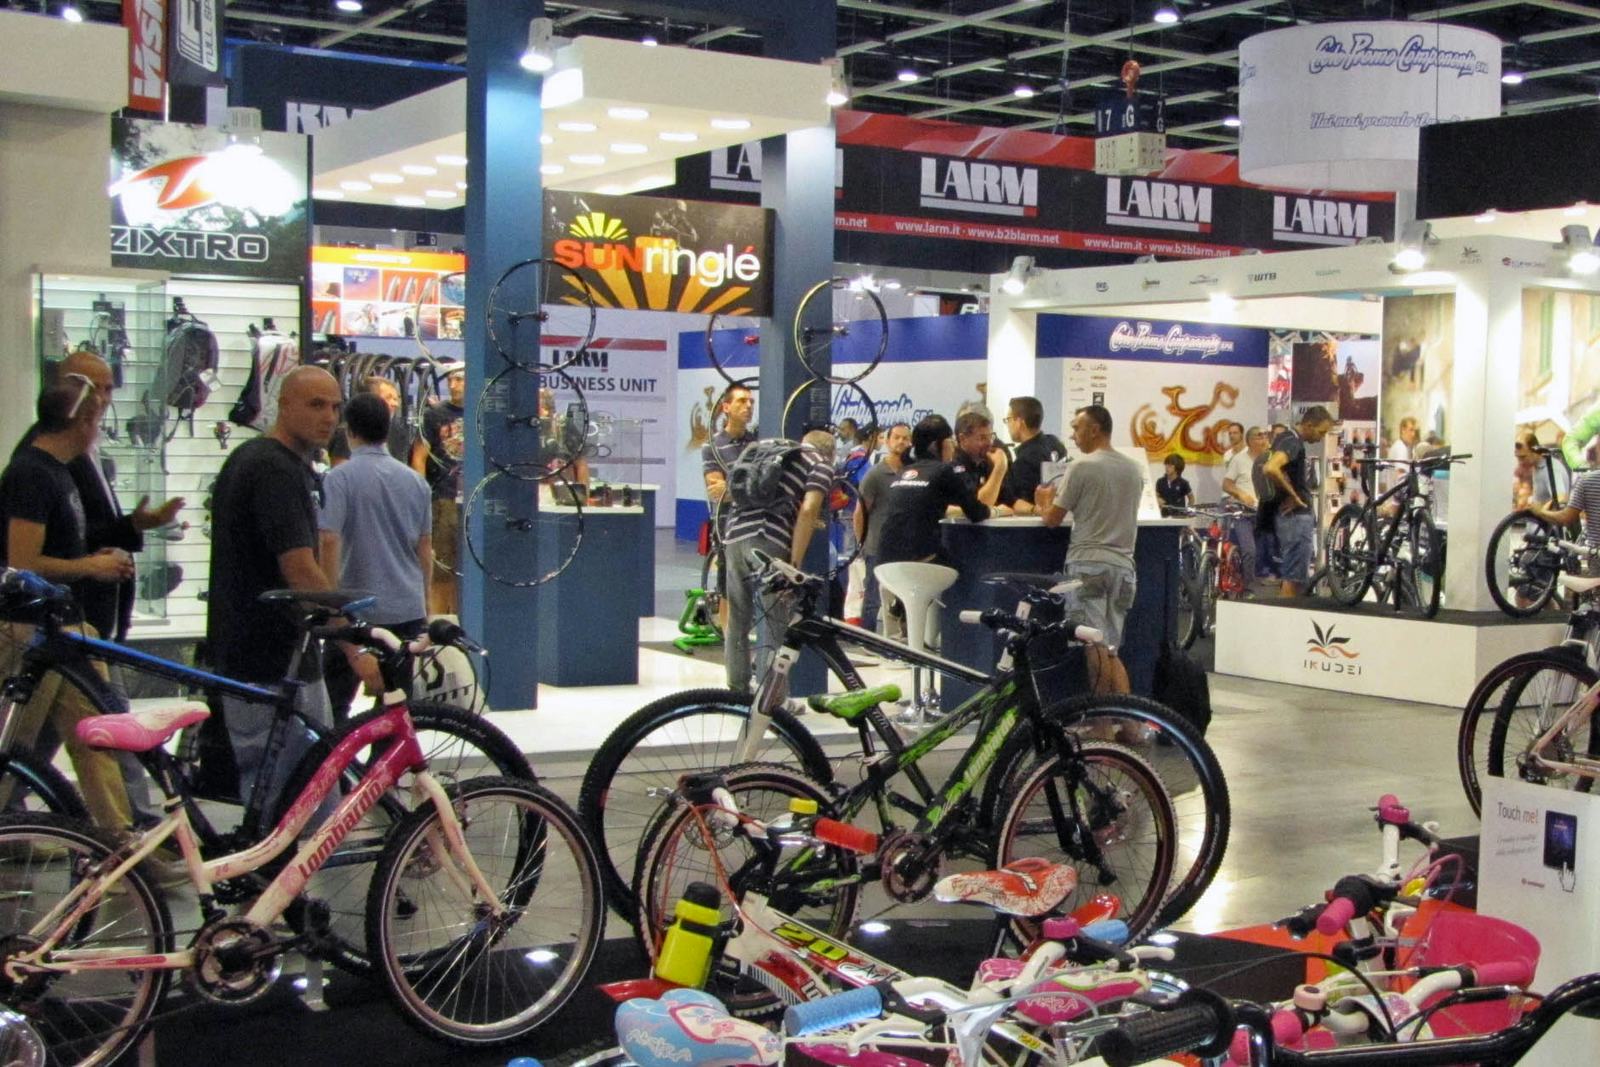 This weekend the all Italian bicycle show ExpoBici will open its doors. Trade day is scheduled for Monday September 22. – Photo Bike Europe